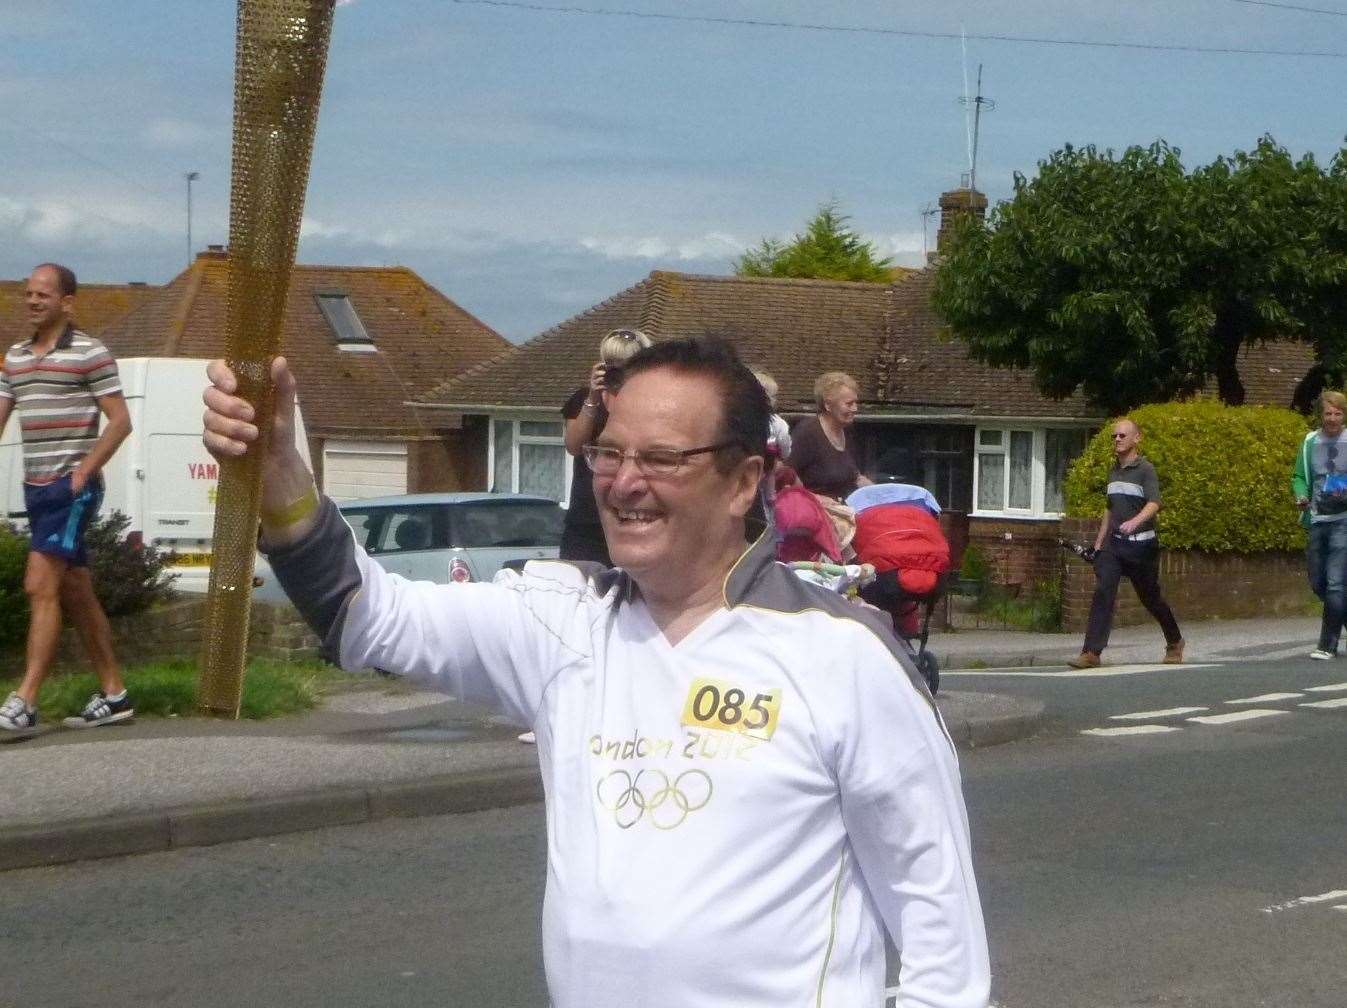 Dale carries the Olympic torch